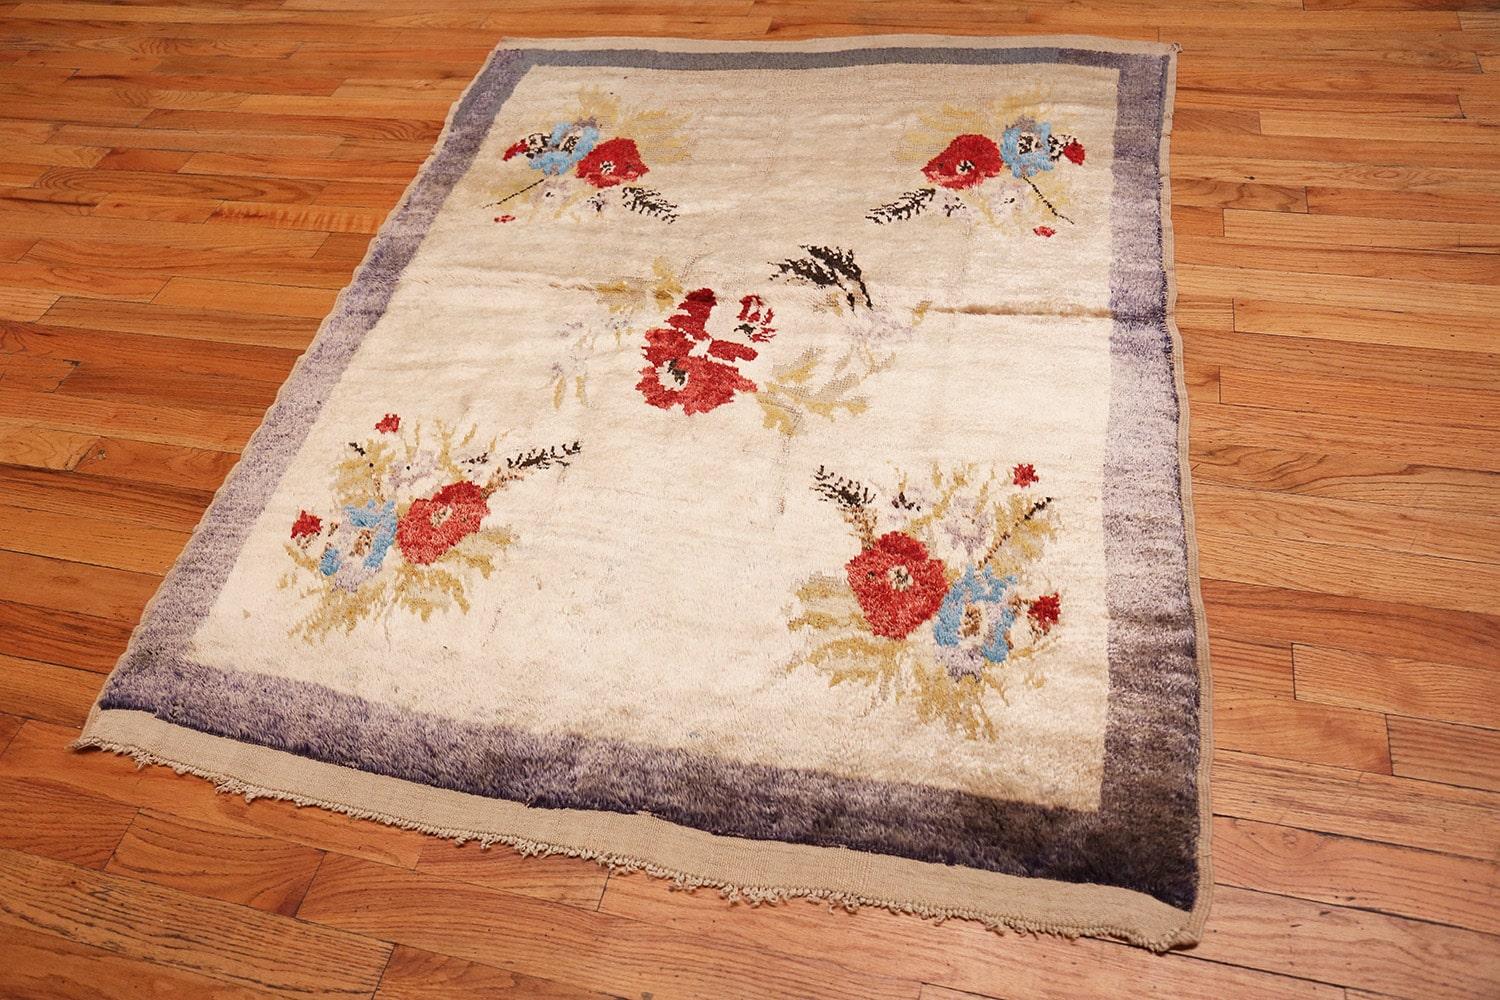 Hand-Knotted Vintage Turkish Sivas Rug. Size: 4 ft 8 in x 6 ft 2 in (1.42 m x 1.88 m)